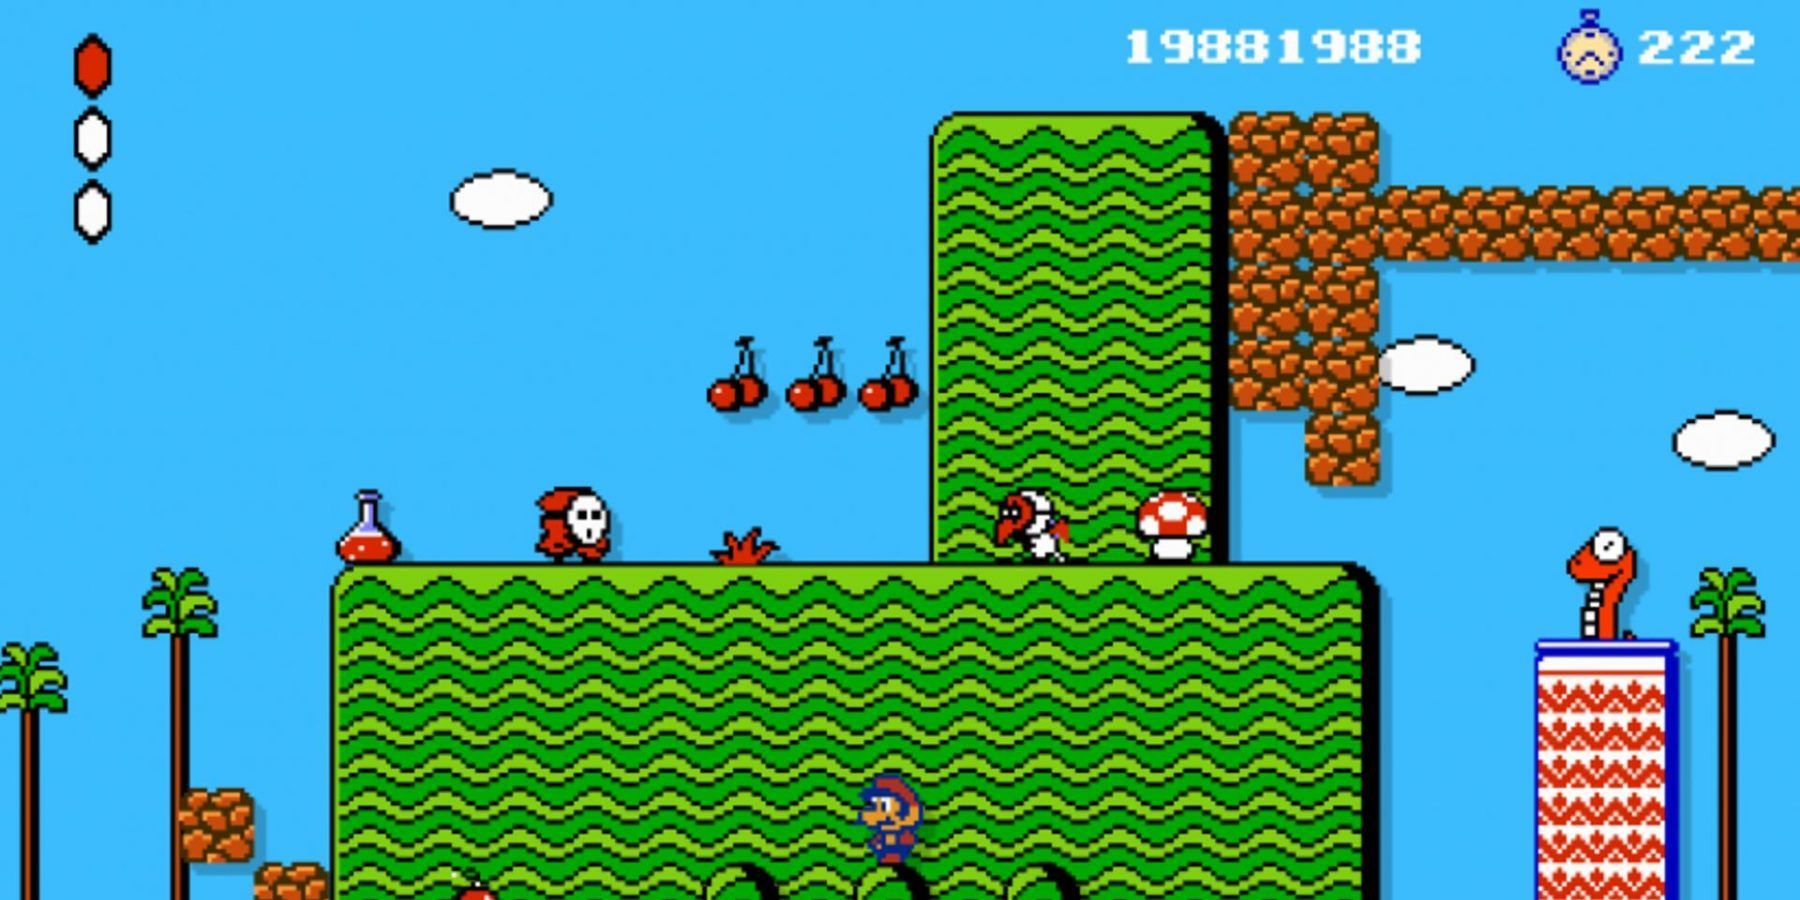 Super Mari Bros. 2 with Mario side-scrolling through landscape with various enemies